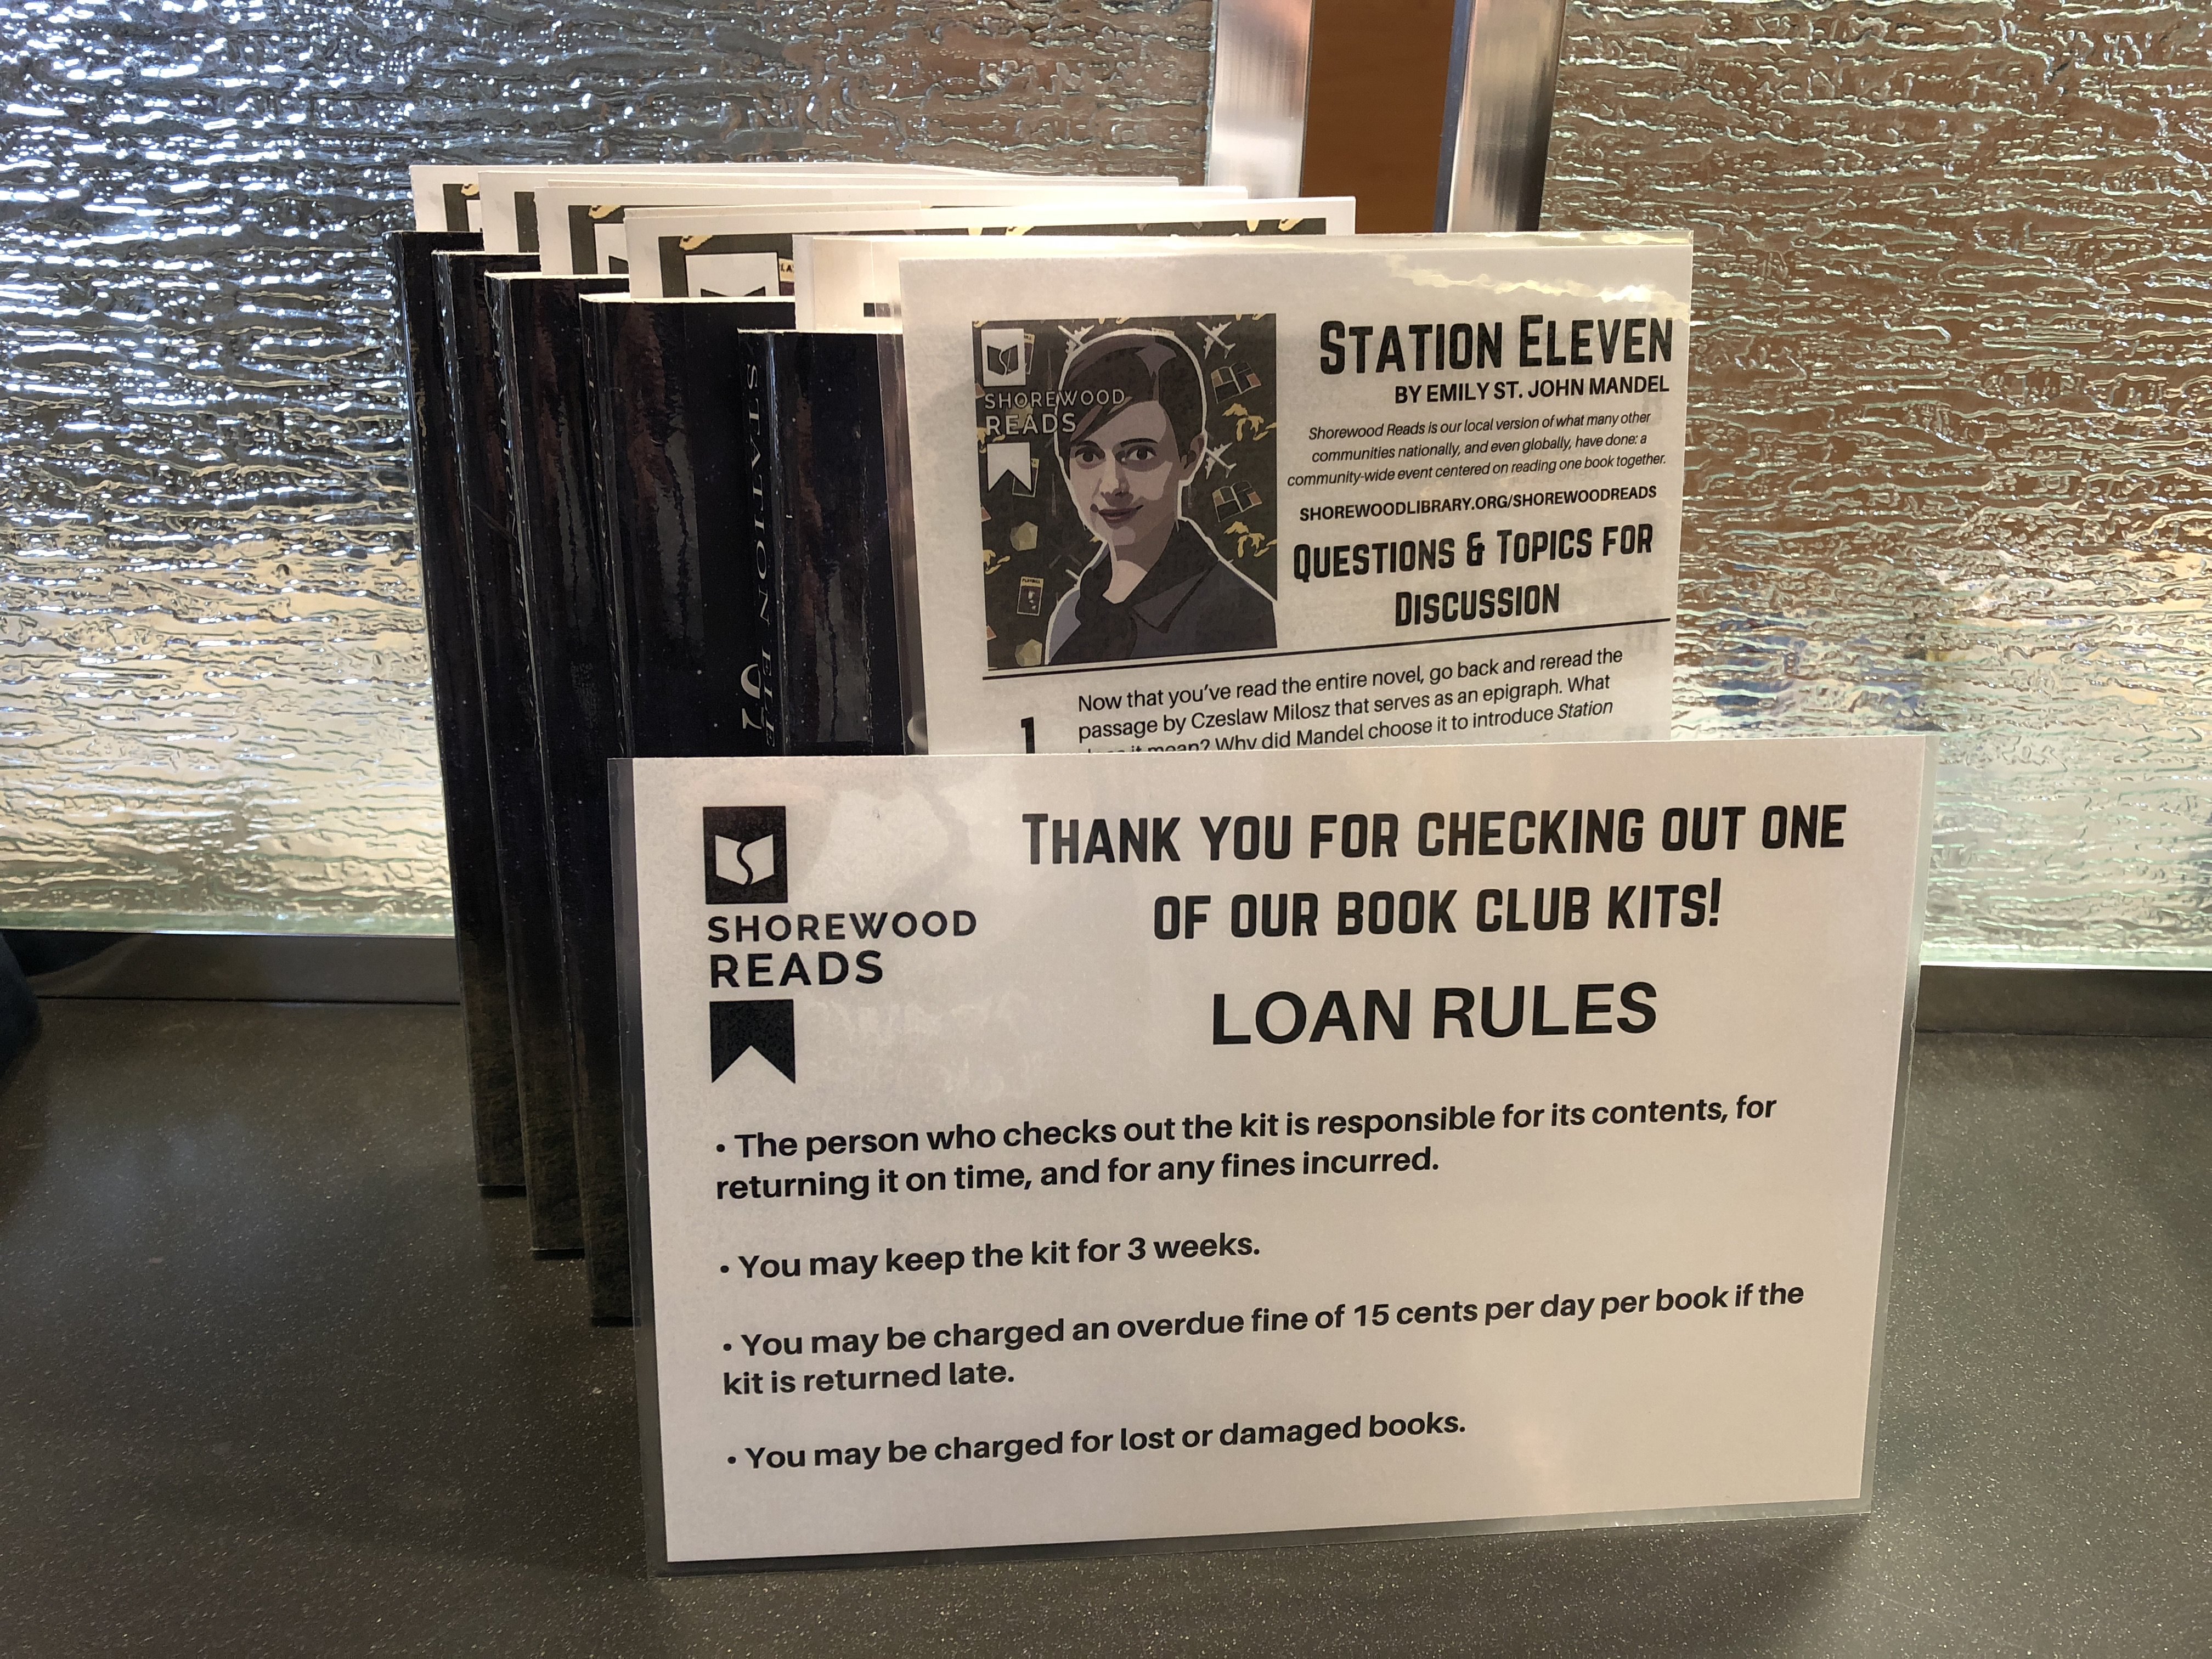 Copies of Station Eleven by a Shorewood Reads Loan Rules sign propped.